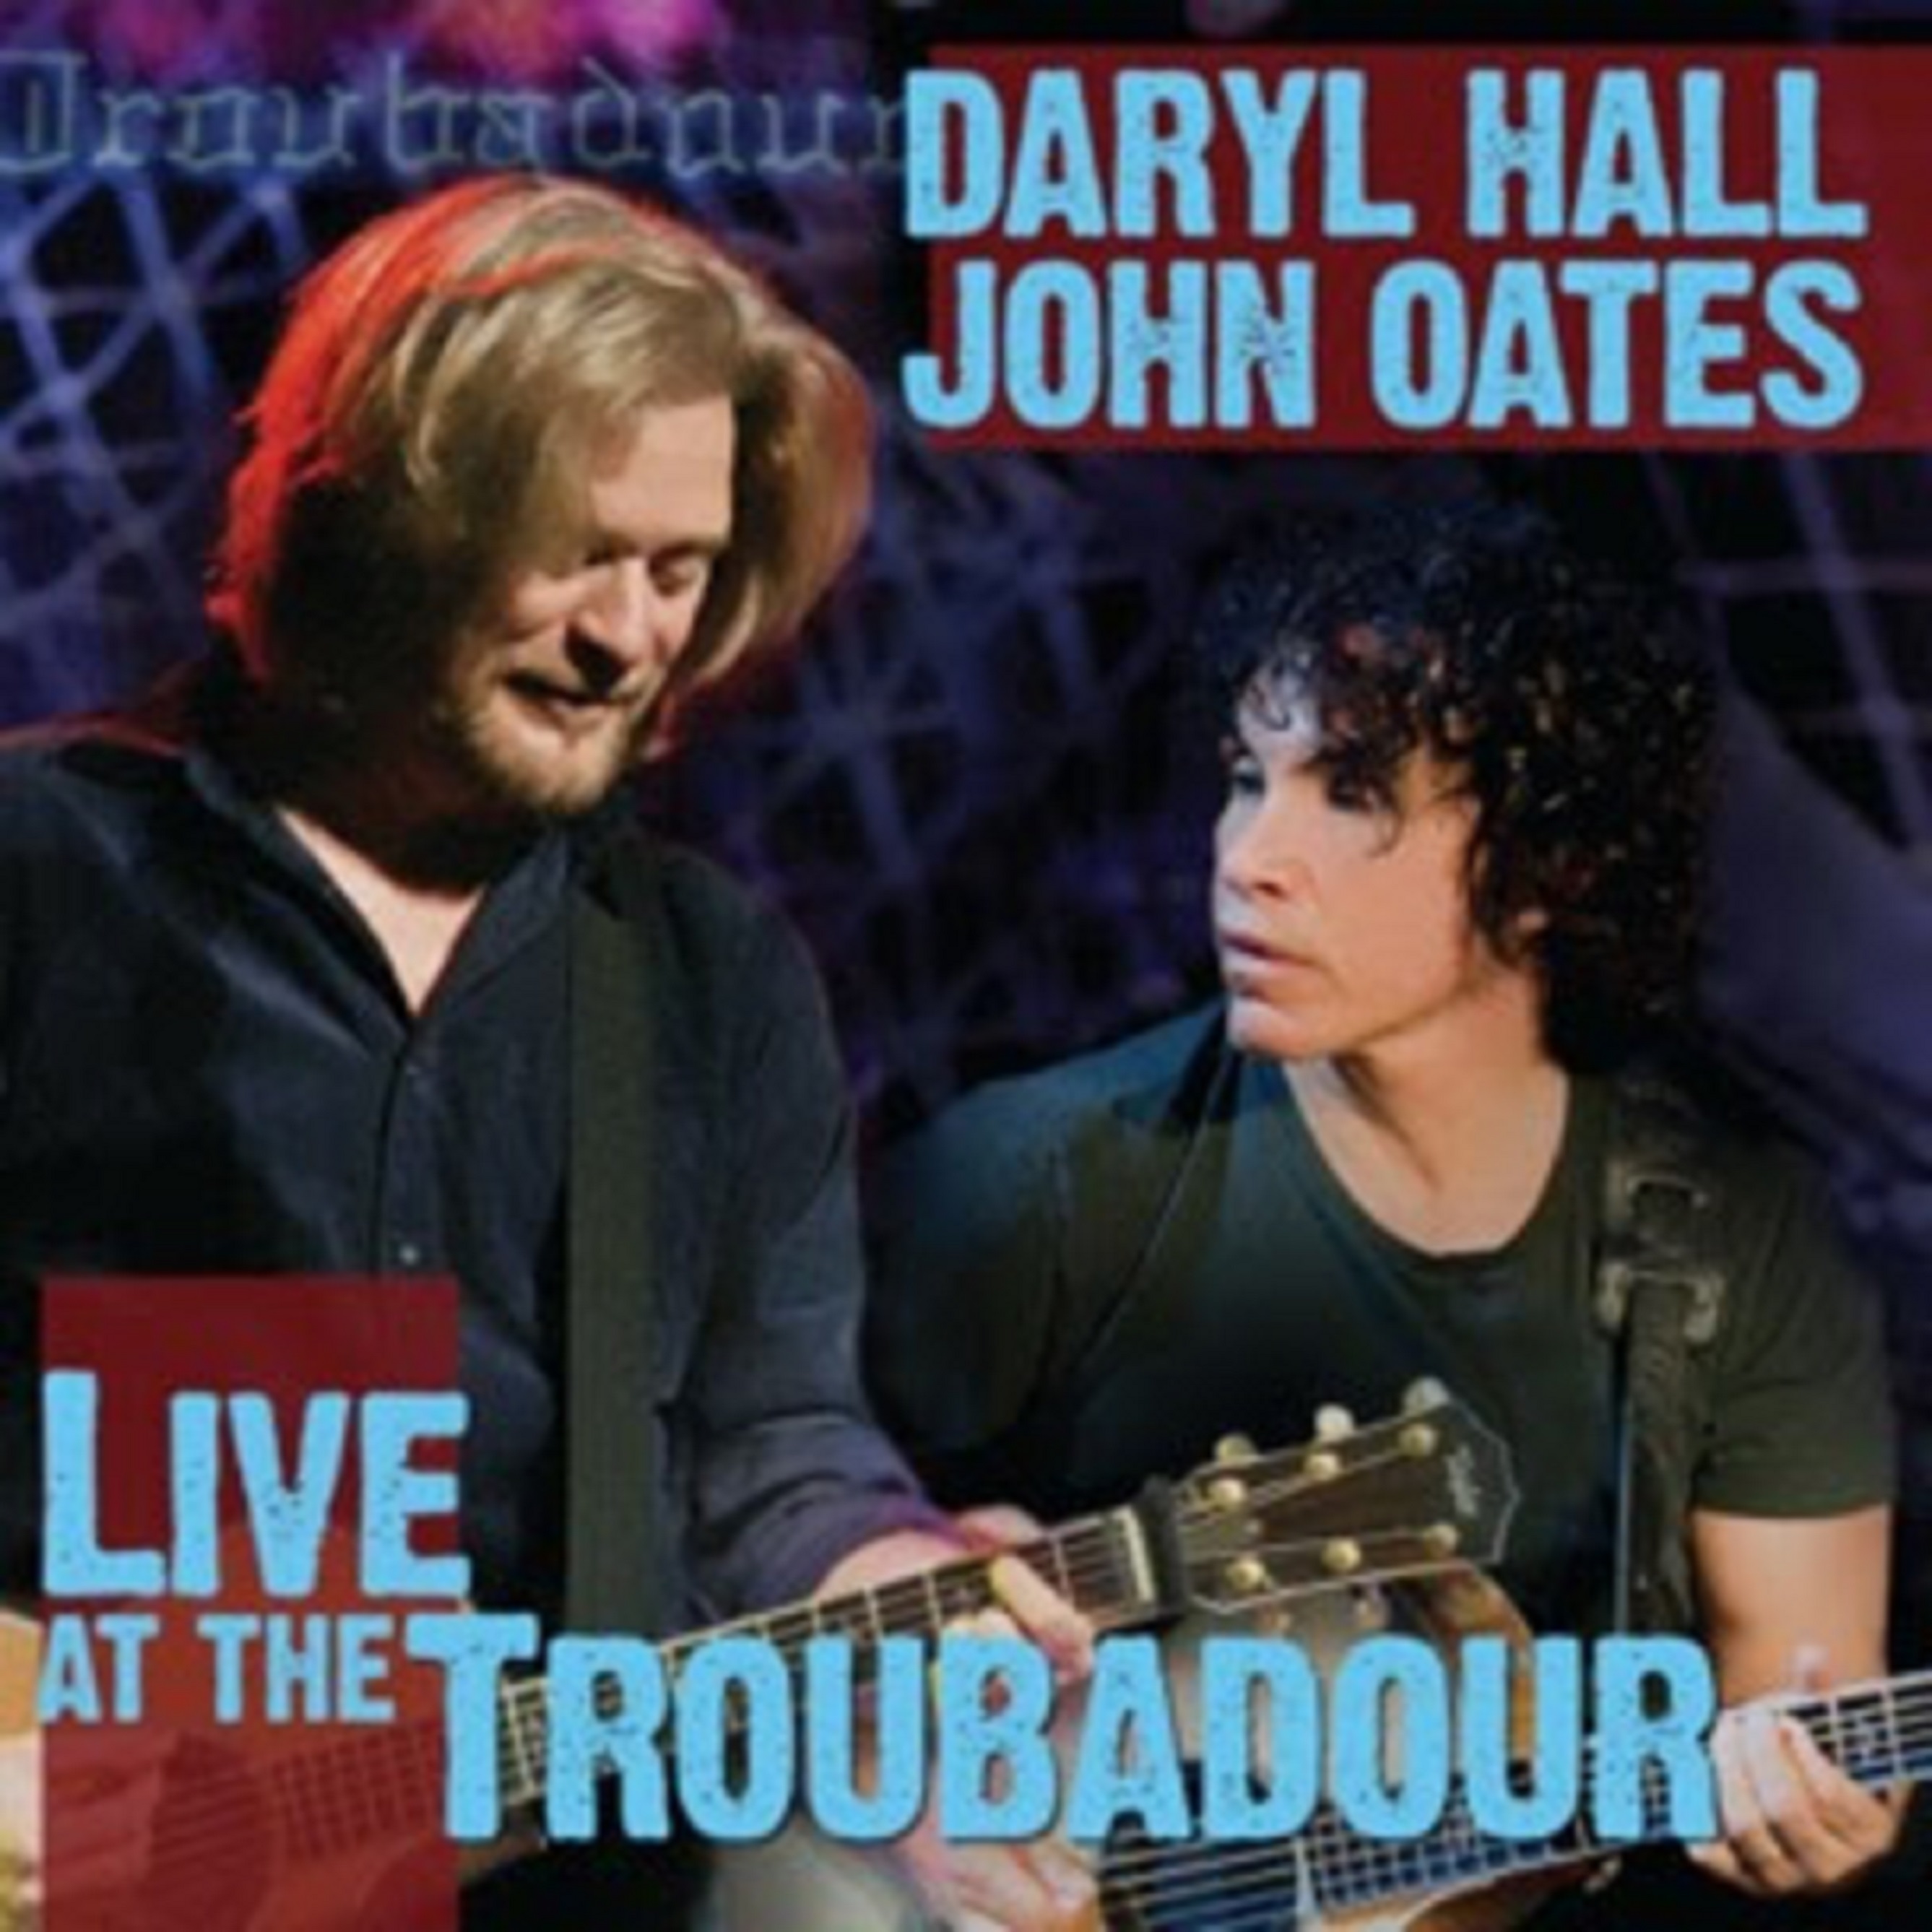 Out Now - From Daryl Hall & John Oates "Live At The Troubadour" on 3LP Vinyl for the First Time